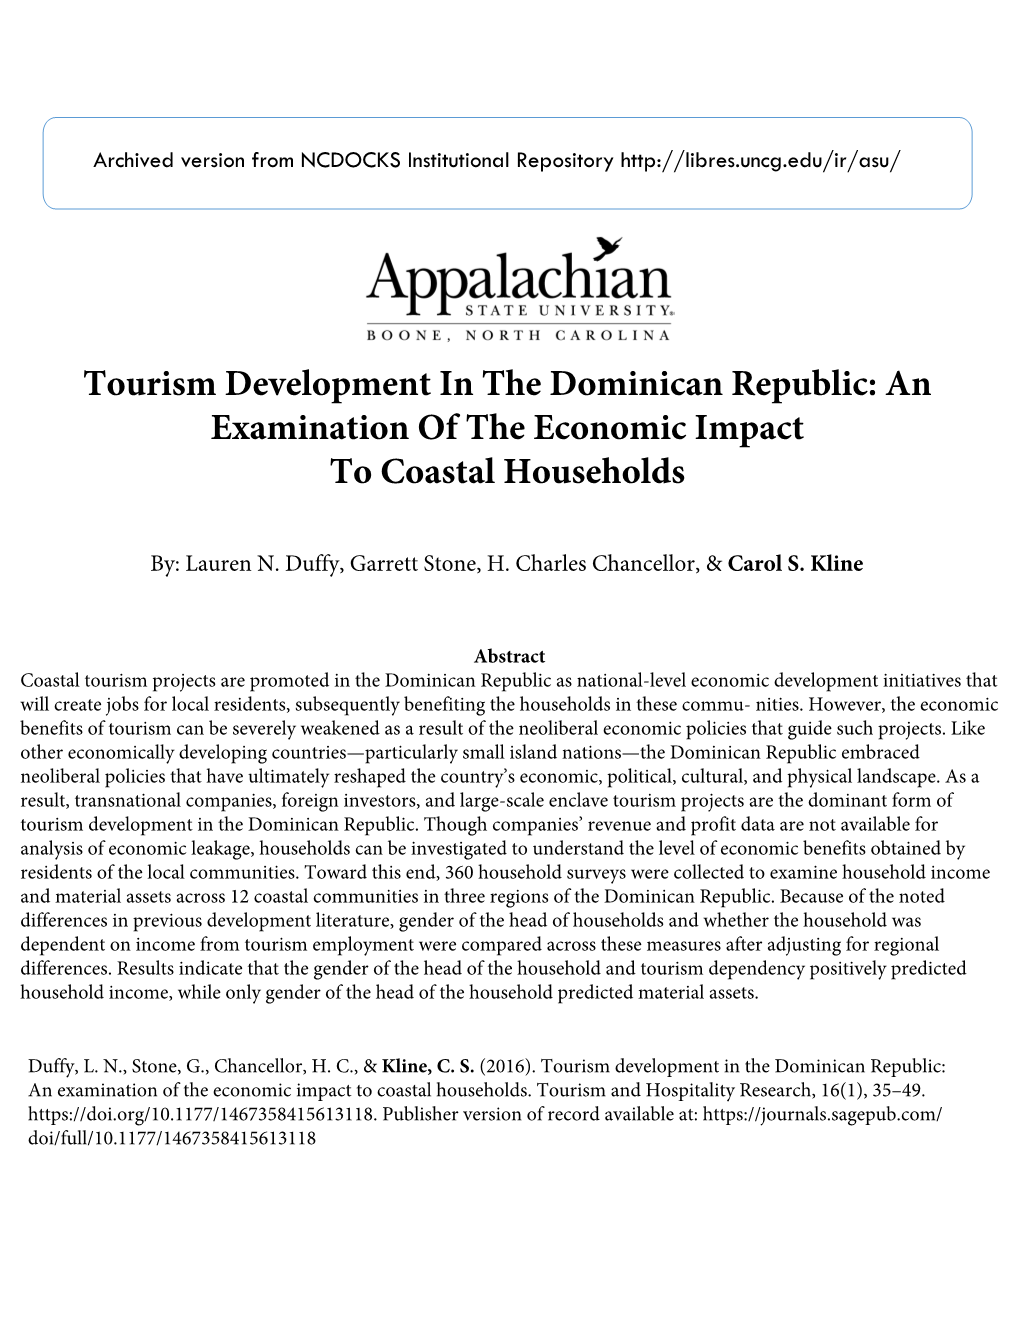 Tourism Development in the Dominican Republic: an Examination of the Economic Impact to Coastal Households